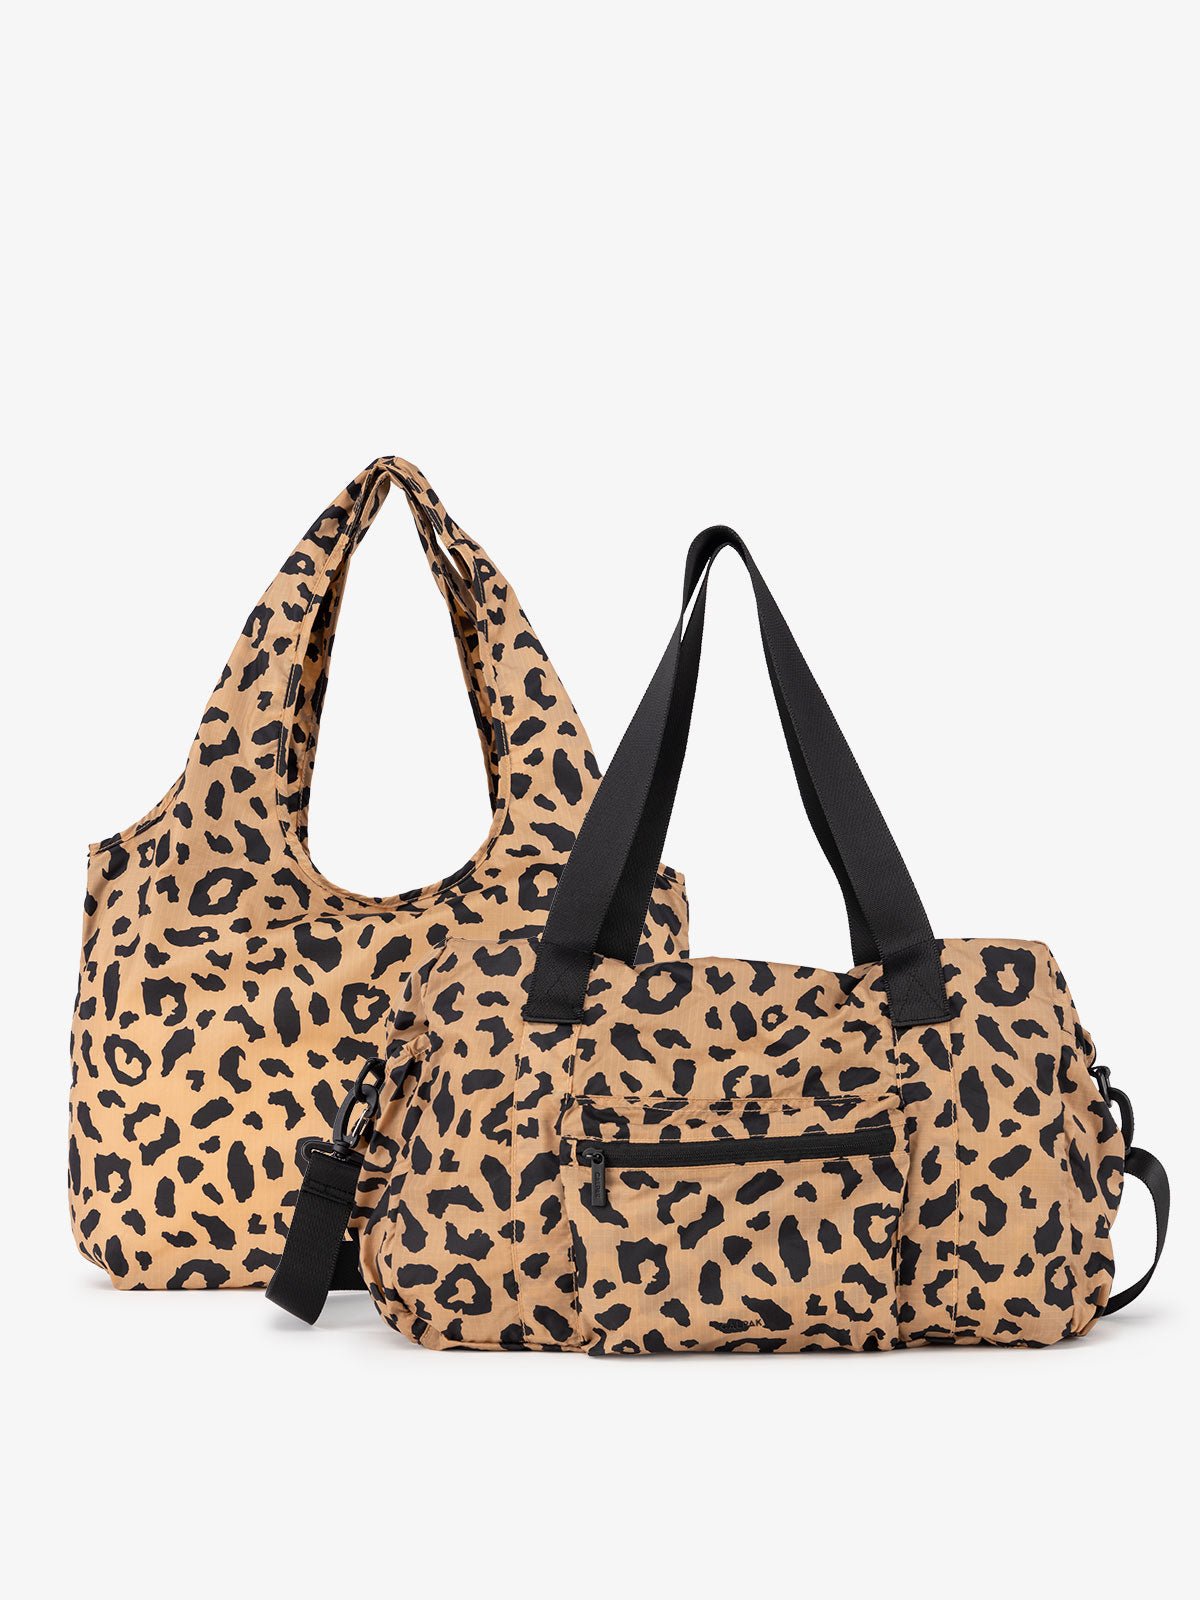 compakt duo with tote bag and duffel bag in cheetah